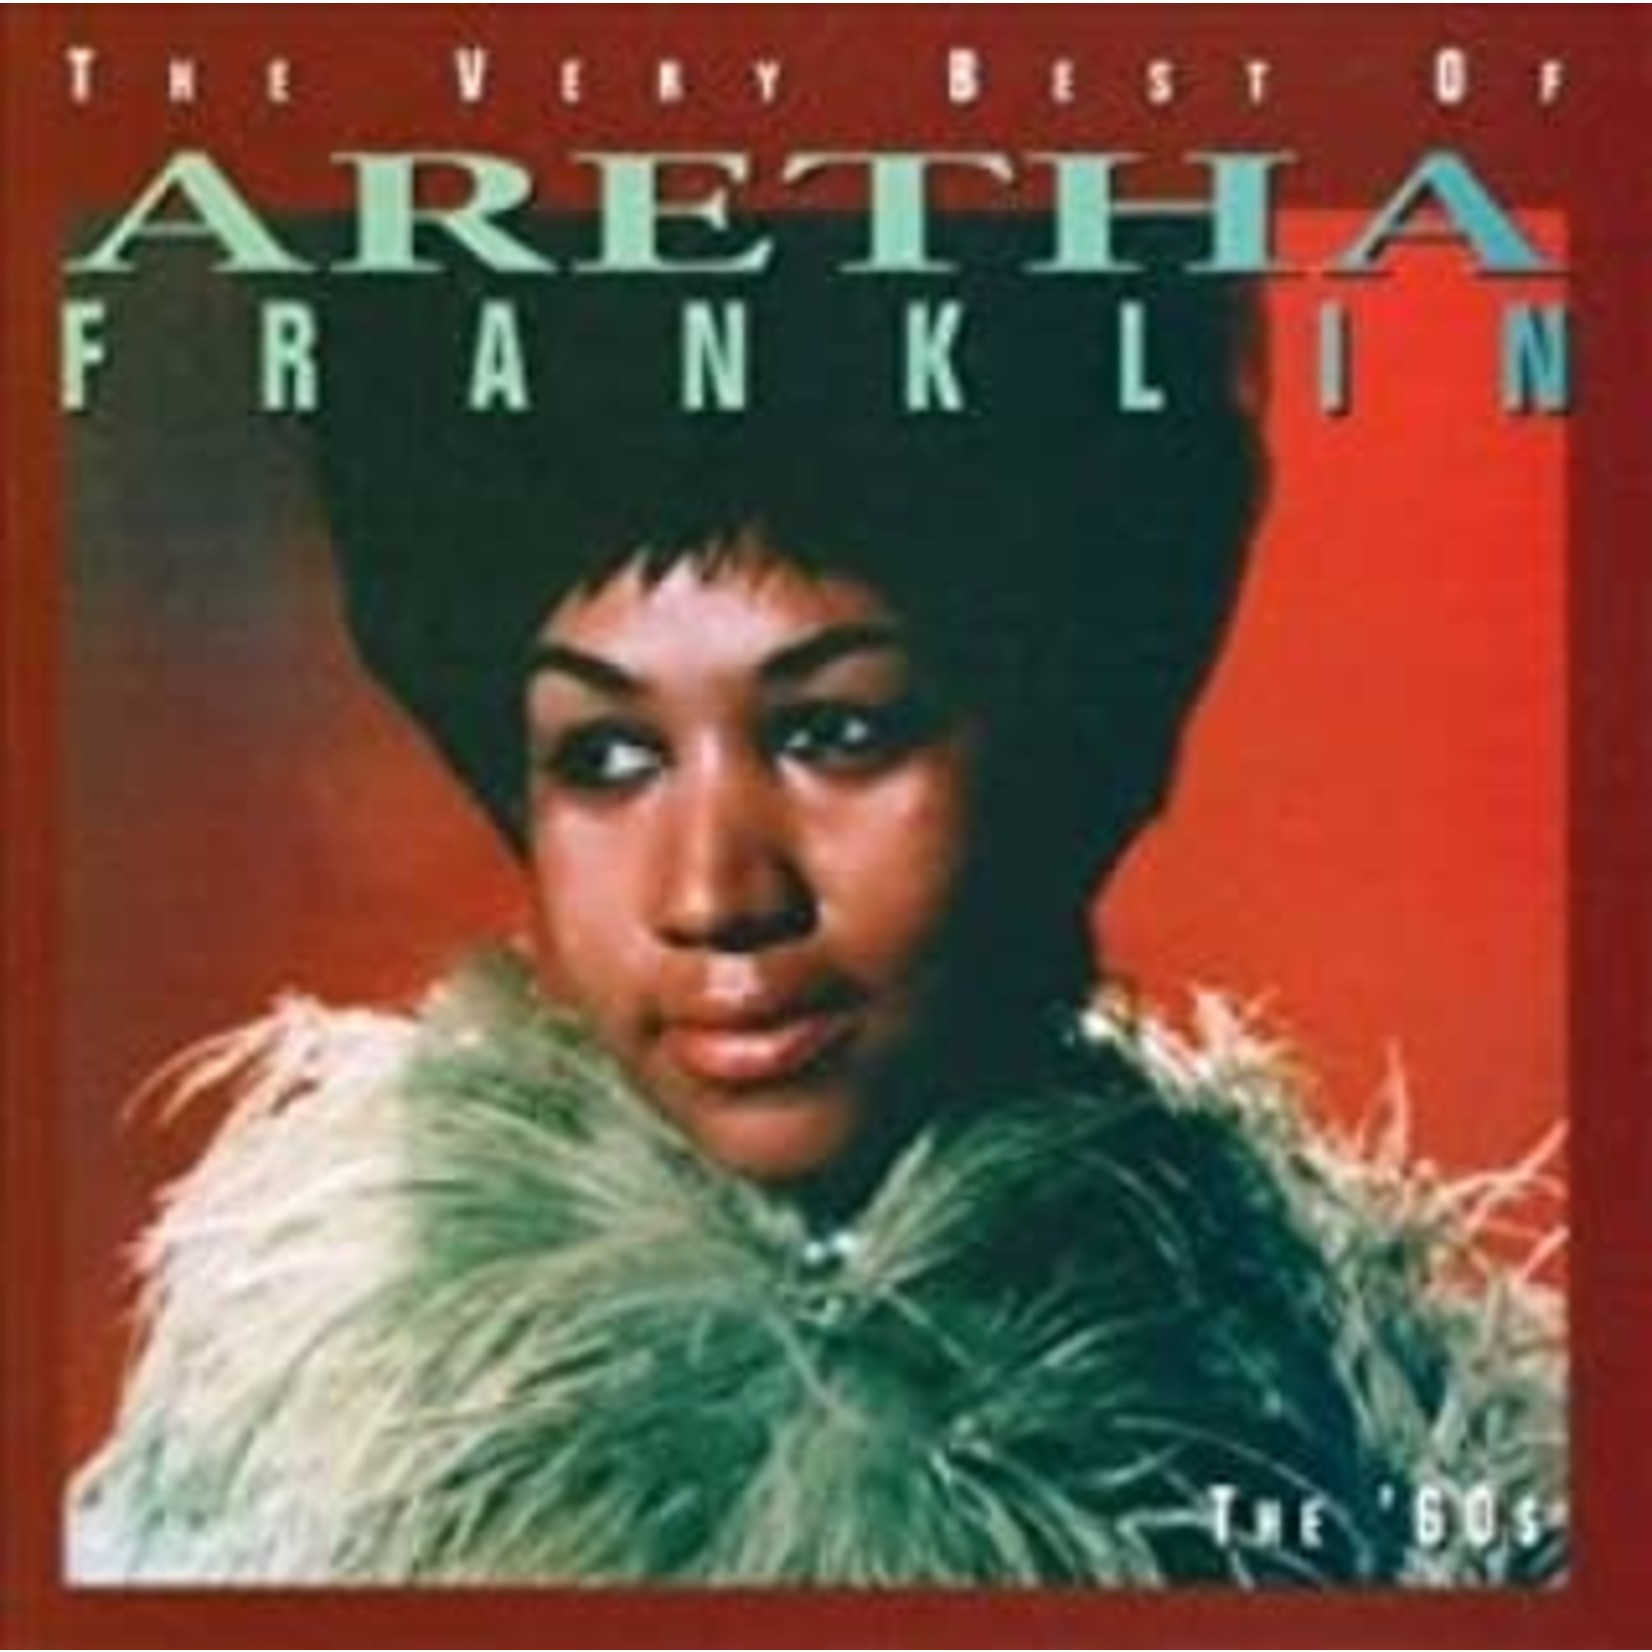 Aretha Franklin - The Very Best Of Aretha Franklin: The 60's [CD]